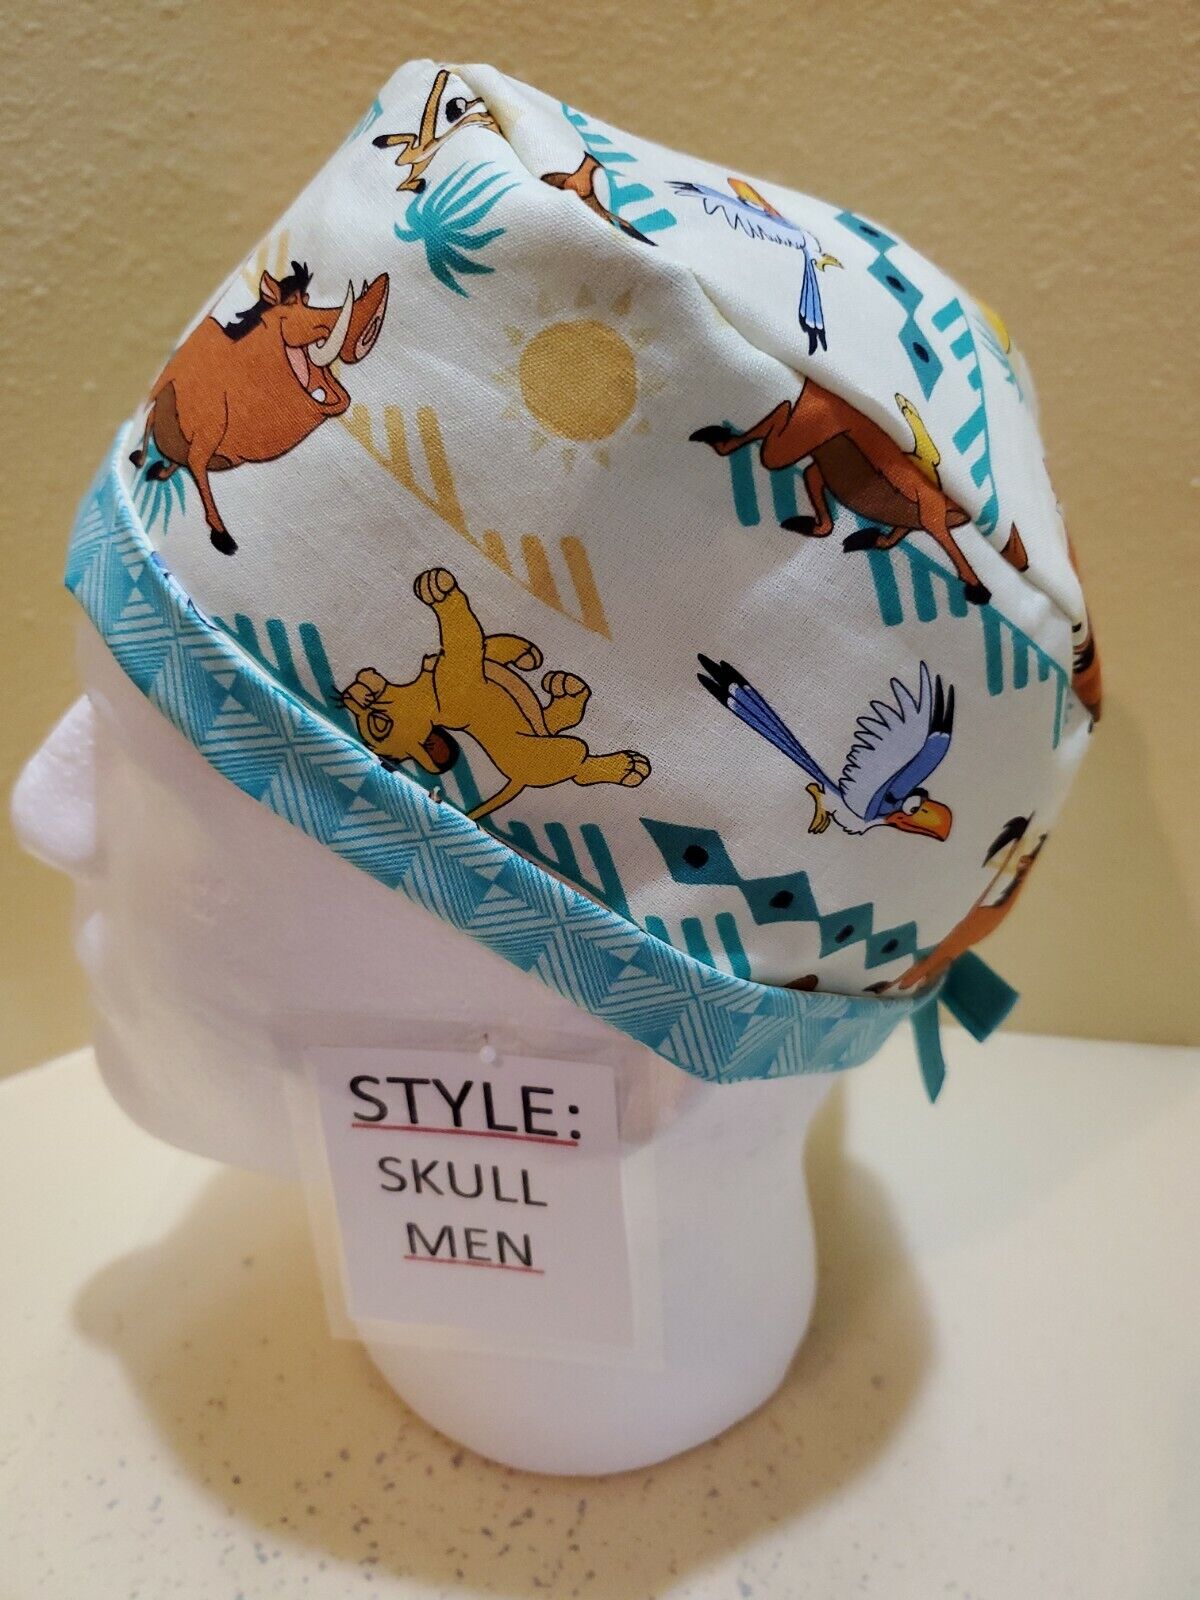 Lion King Disney Men's Skull Chemo Surgical Cap Max 72% ! Super beauty product restock quality top! OFF Hat Scrub